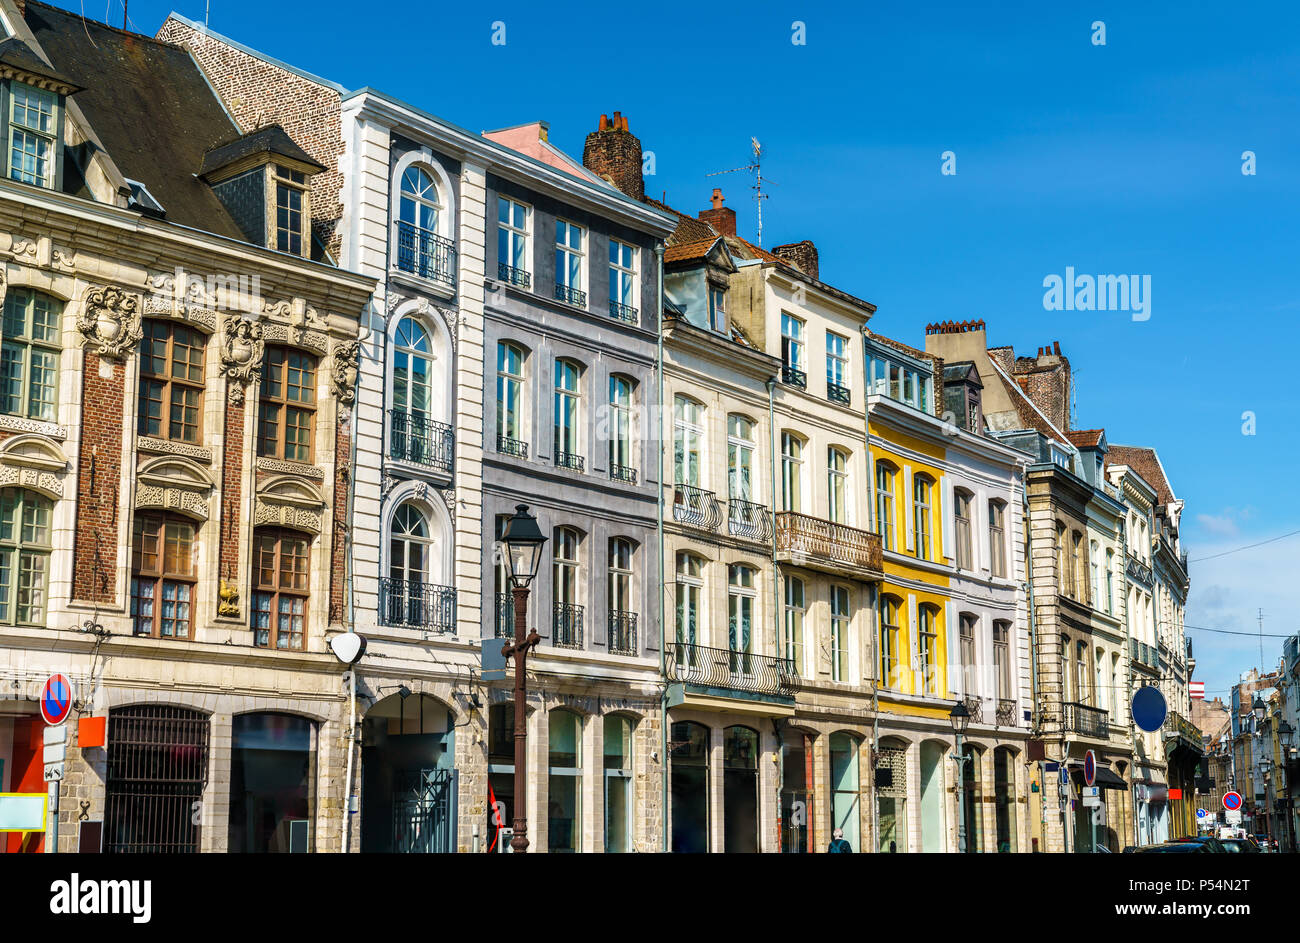 Traditional buildings in the old town of Lille, France Stock Photo